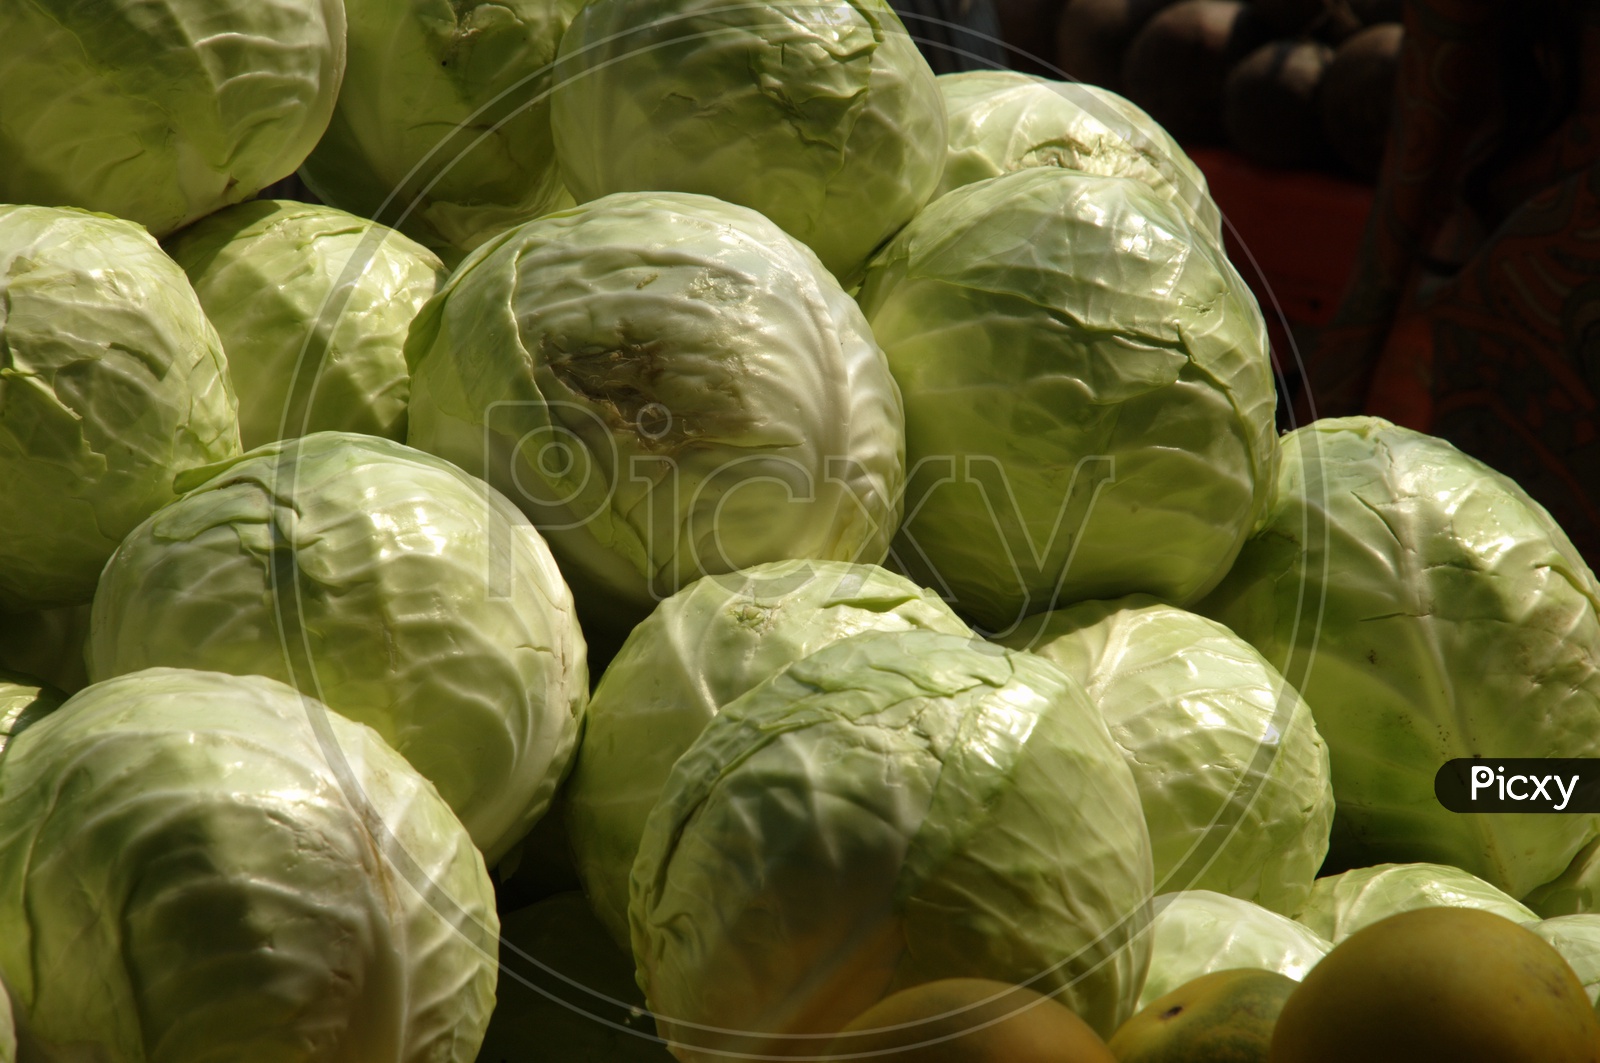 Cabbage vegetable